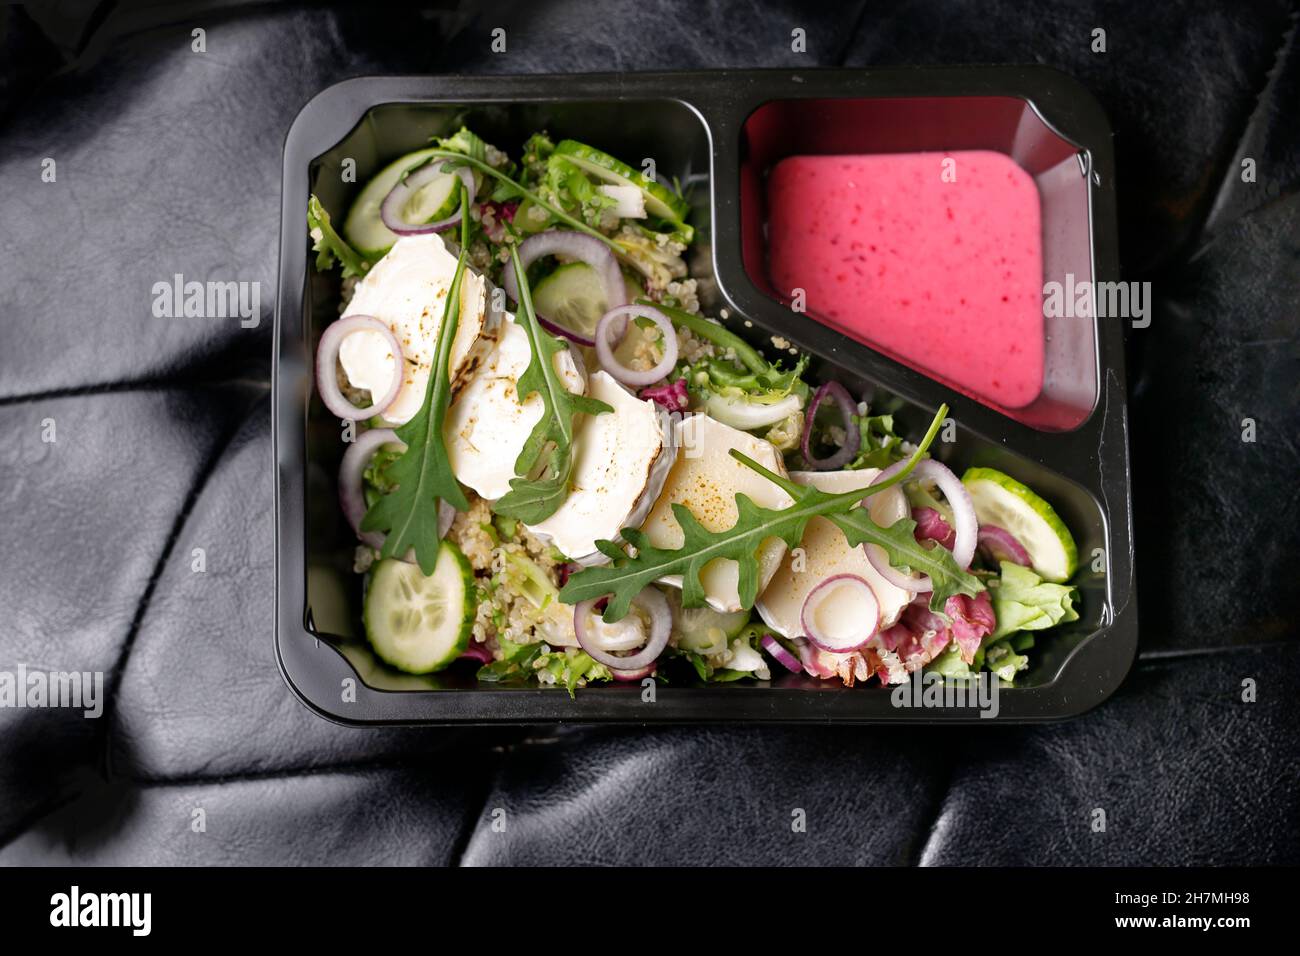 Takeaway, green salad with camembert cheese Appetizing ready-to-go dish served in a disposable box. Culinary photography. Food background. Stock Photo